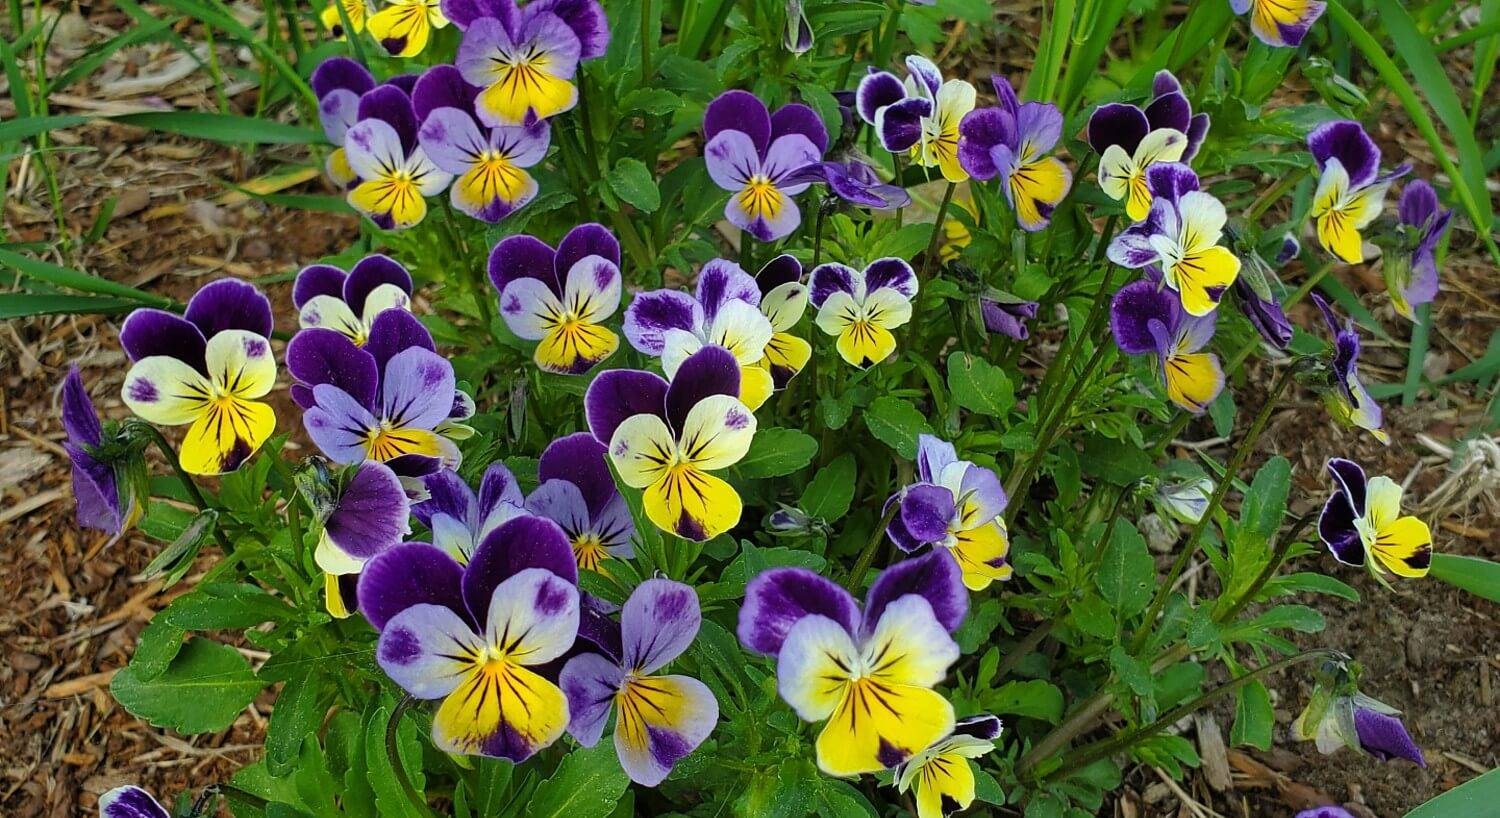 Garden with large plant full of small purple and yellow flowers